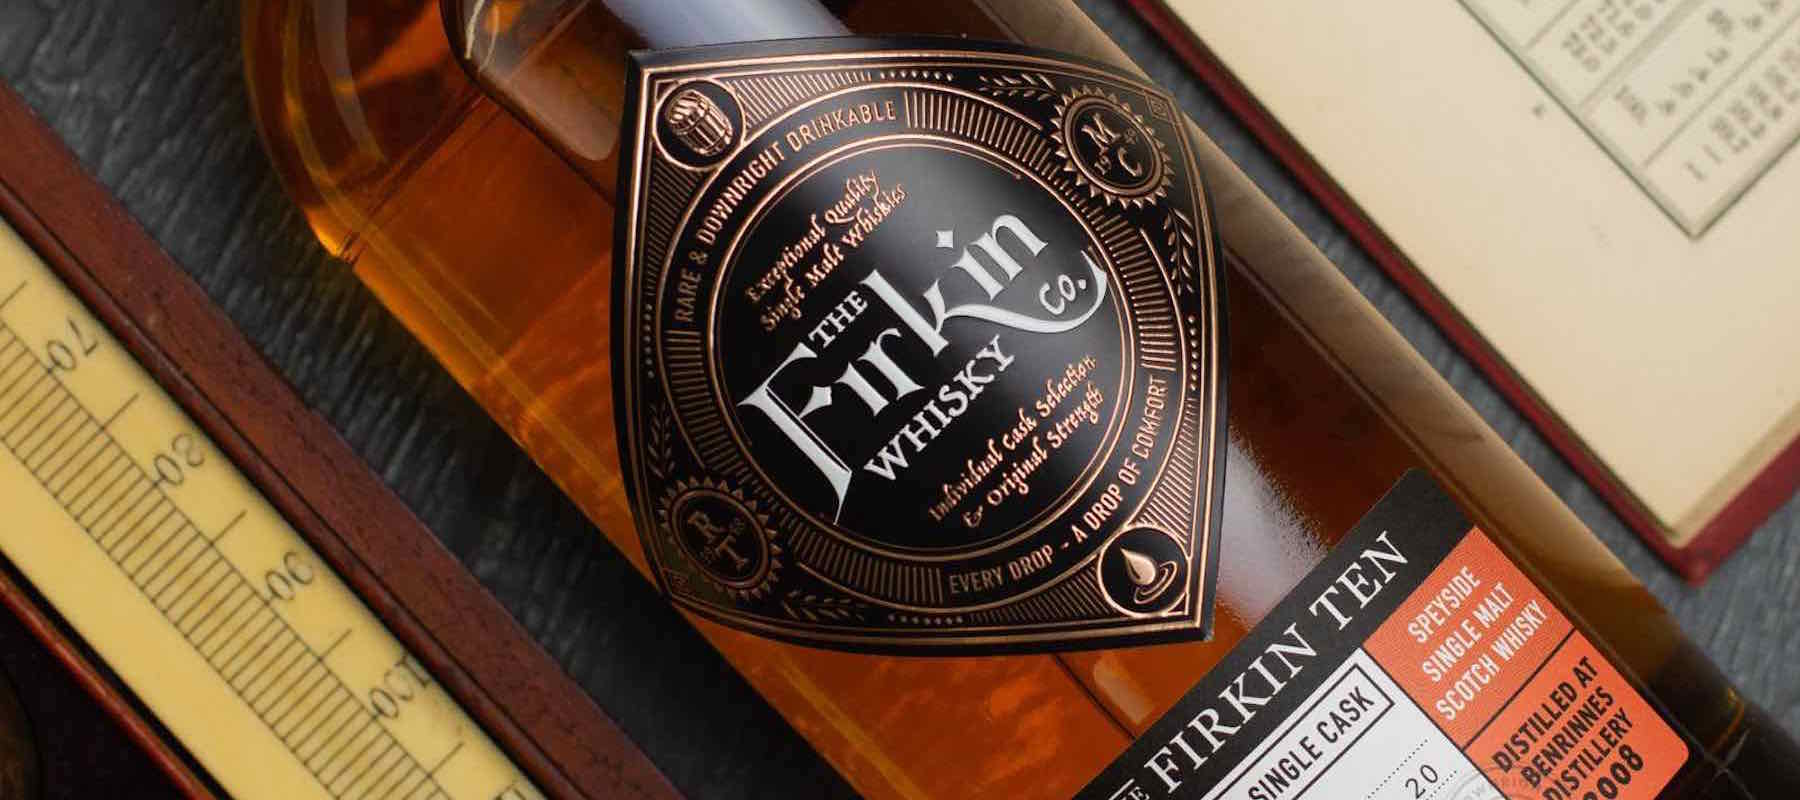 An Interview with Mike Collings of The Firkin Whisky Co